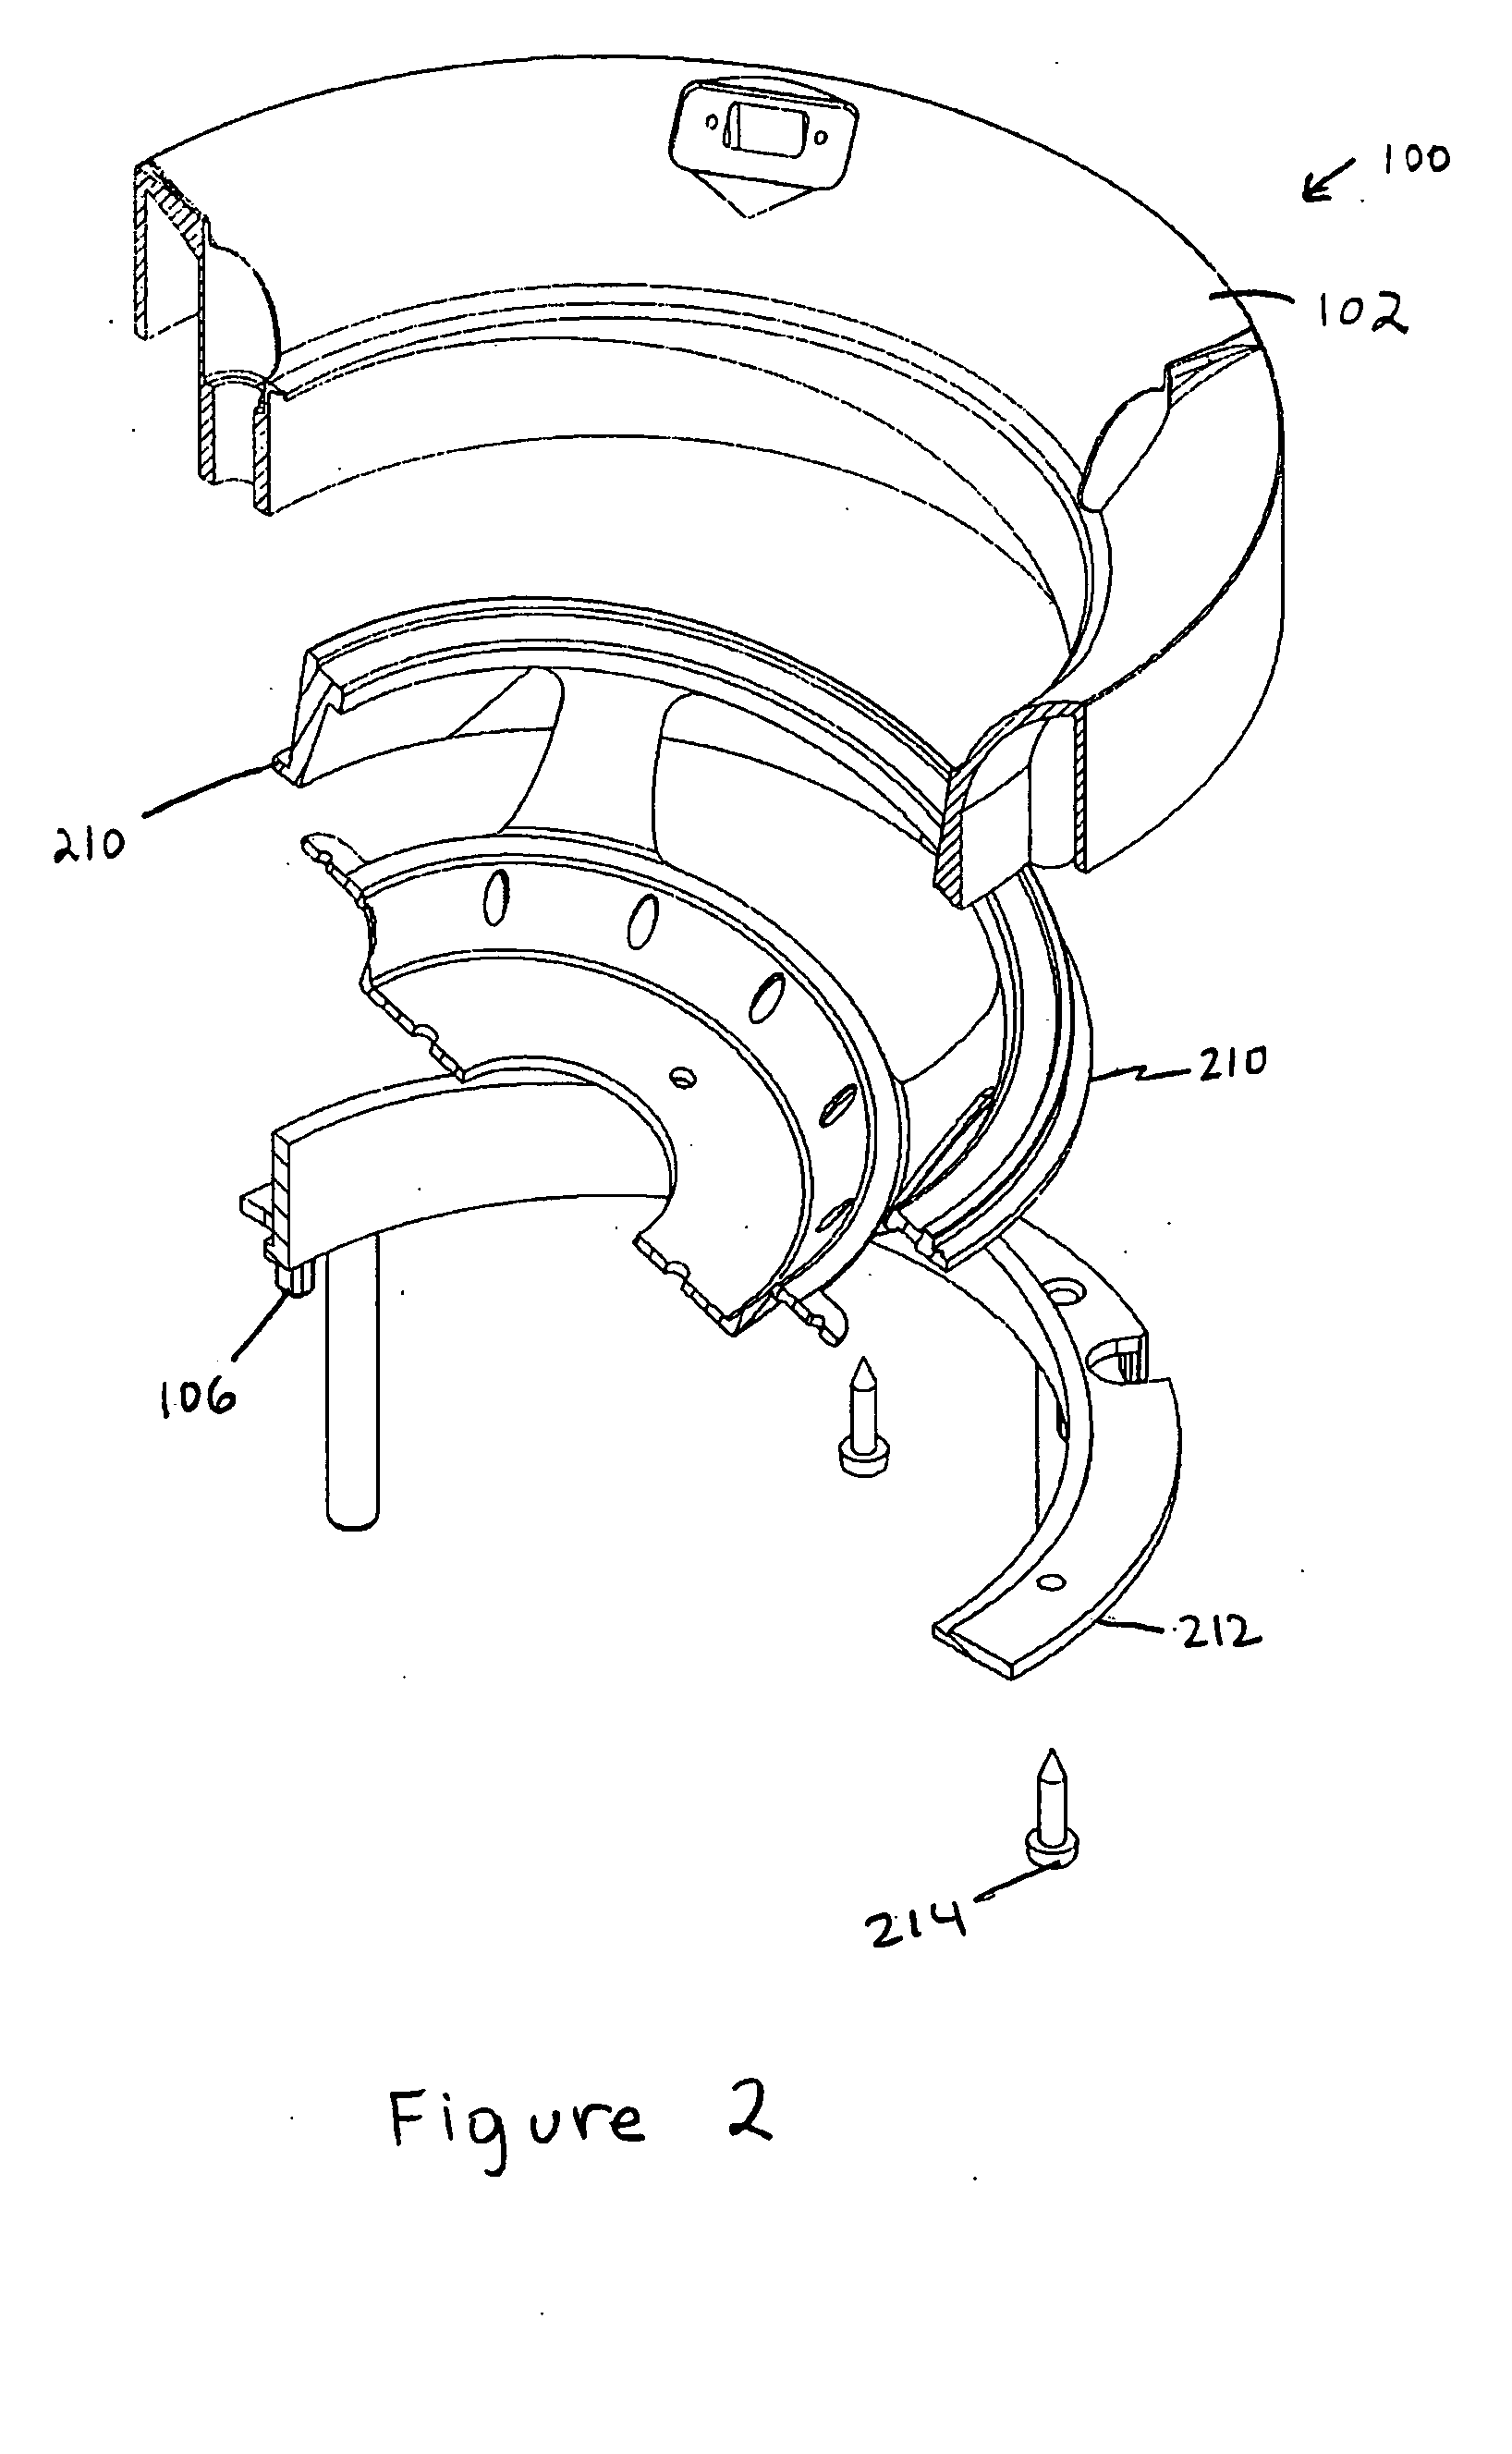 Audio device post extension and angling system